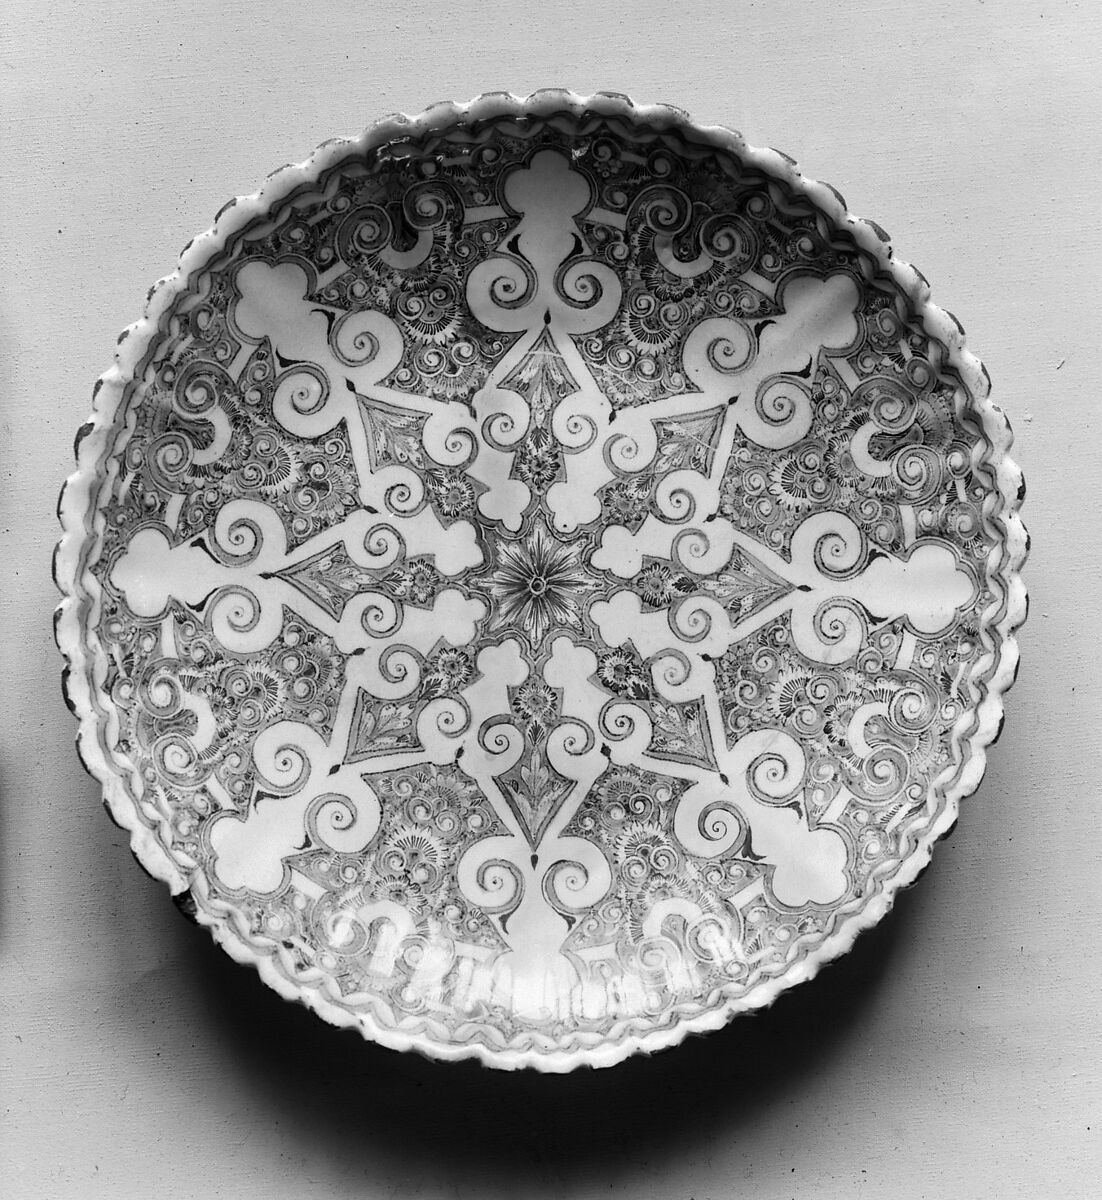 Dish, Faience (tin-glazed earthenware), French, Lille 